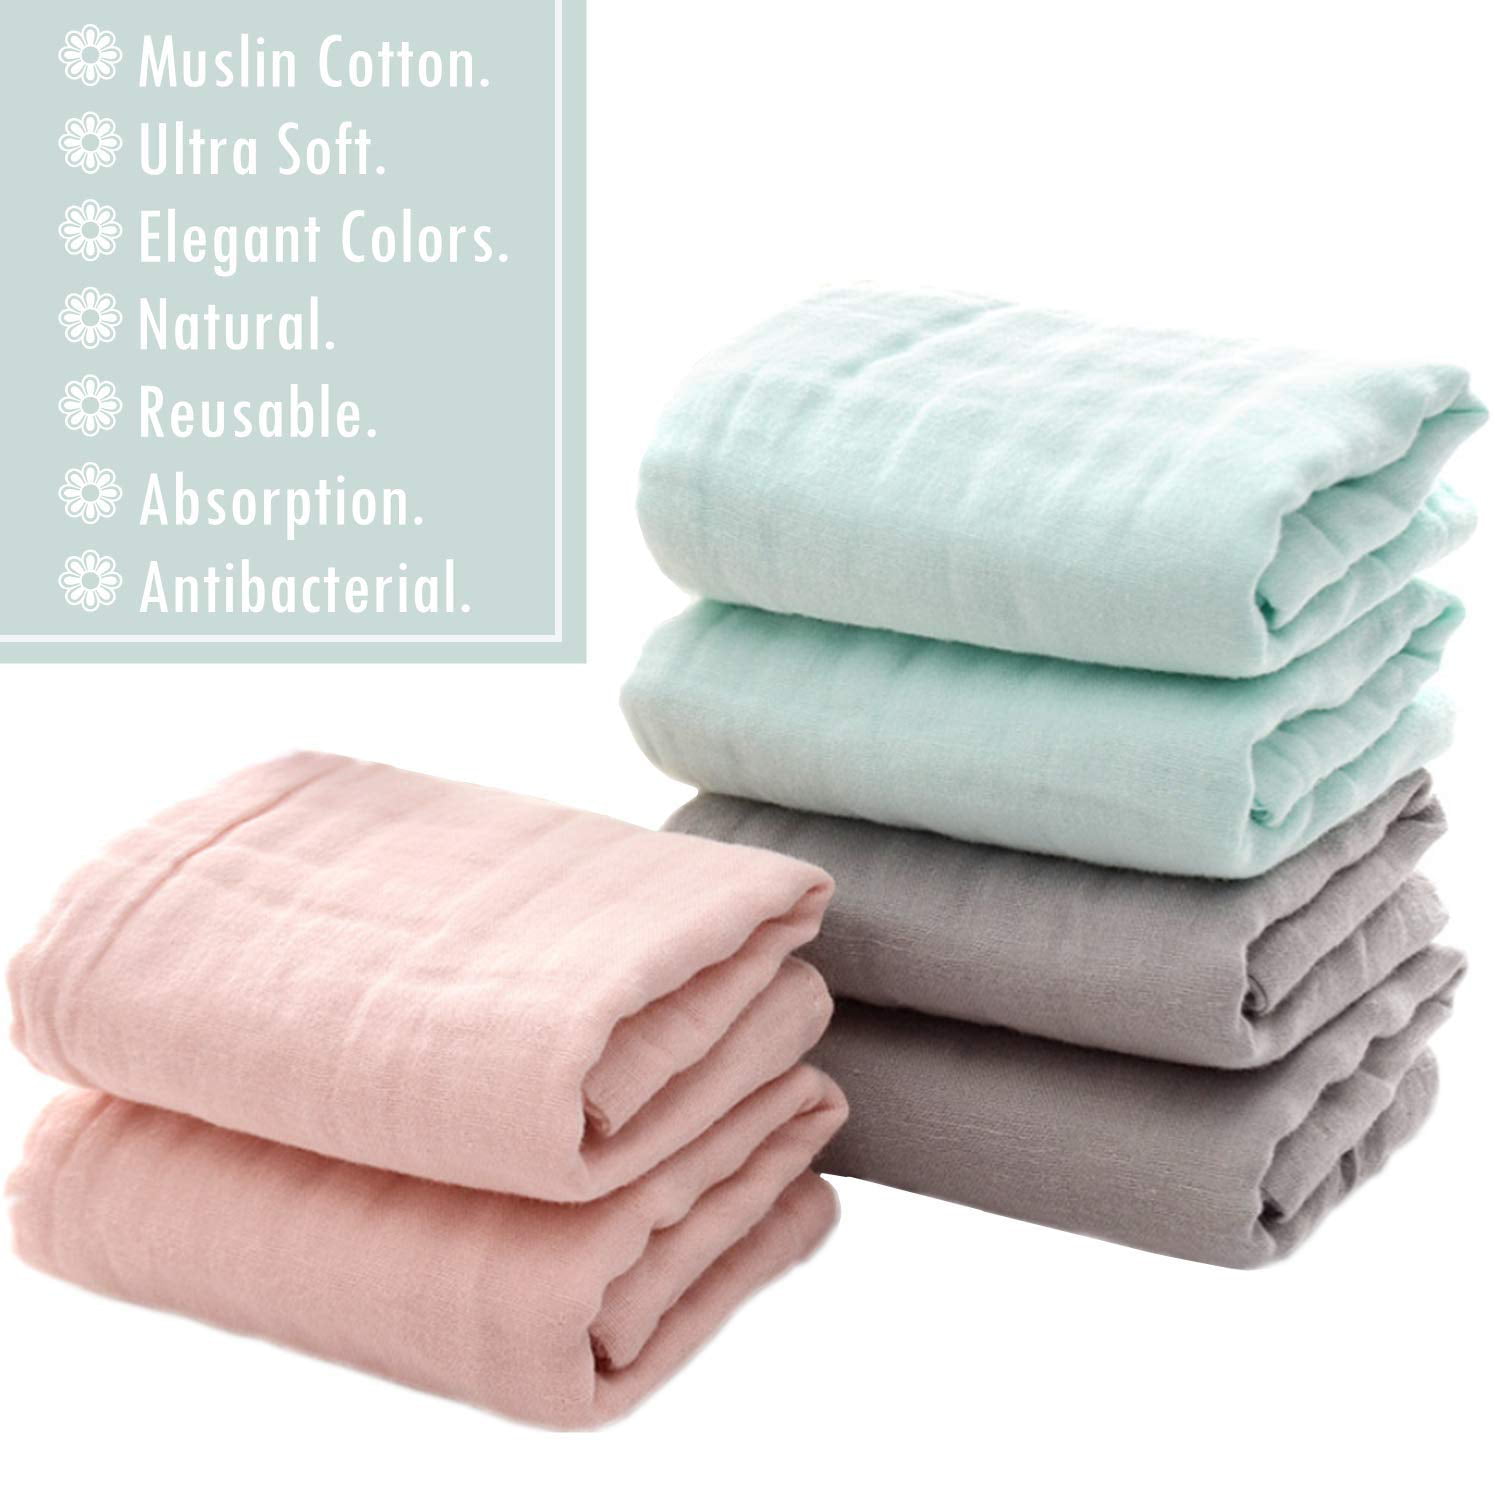 Baby Wipes for Baby Sensitive Skin Set of 6 Muslin Face Towels for Newborn,Ultra Soft Wash Cloths for Babies Baby Bath Washcloths by MUKIN Perfect Baby Shower Gift.12X12 